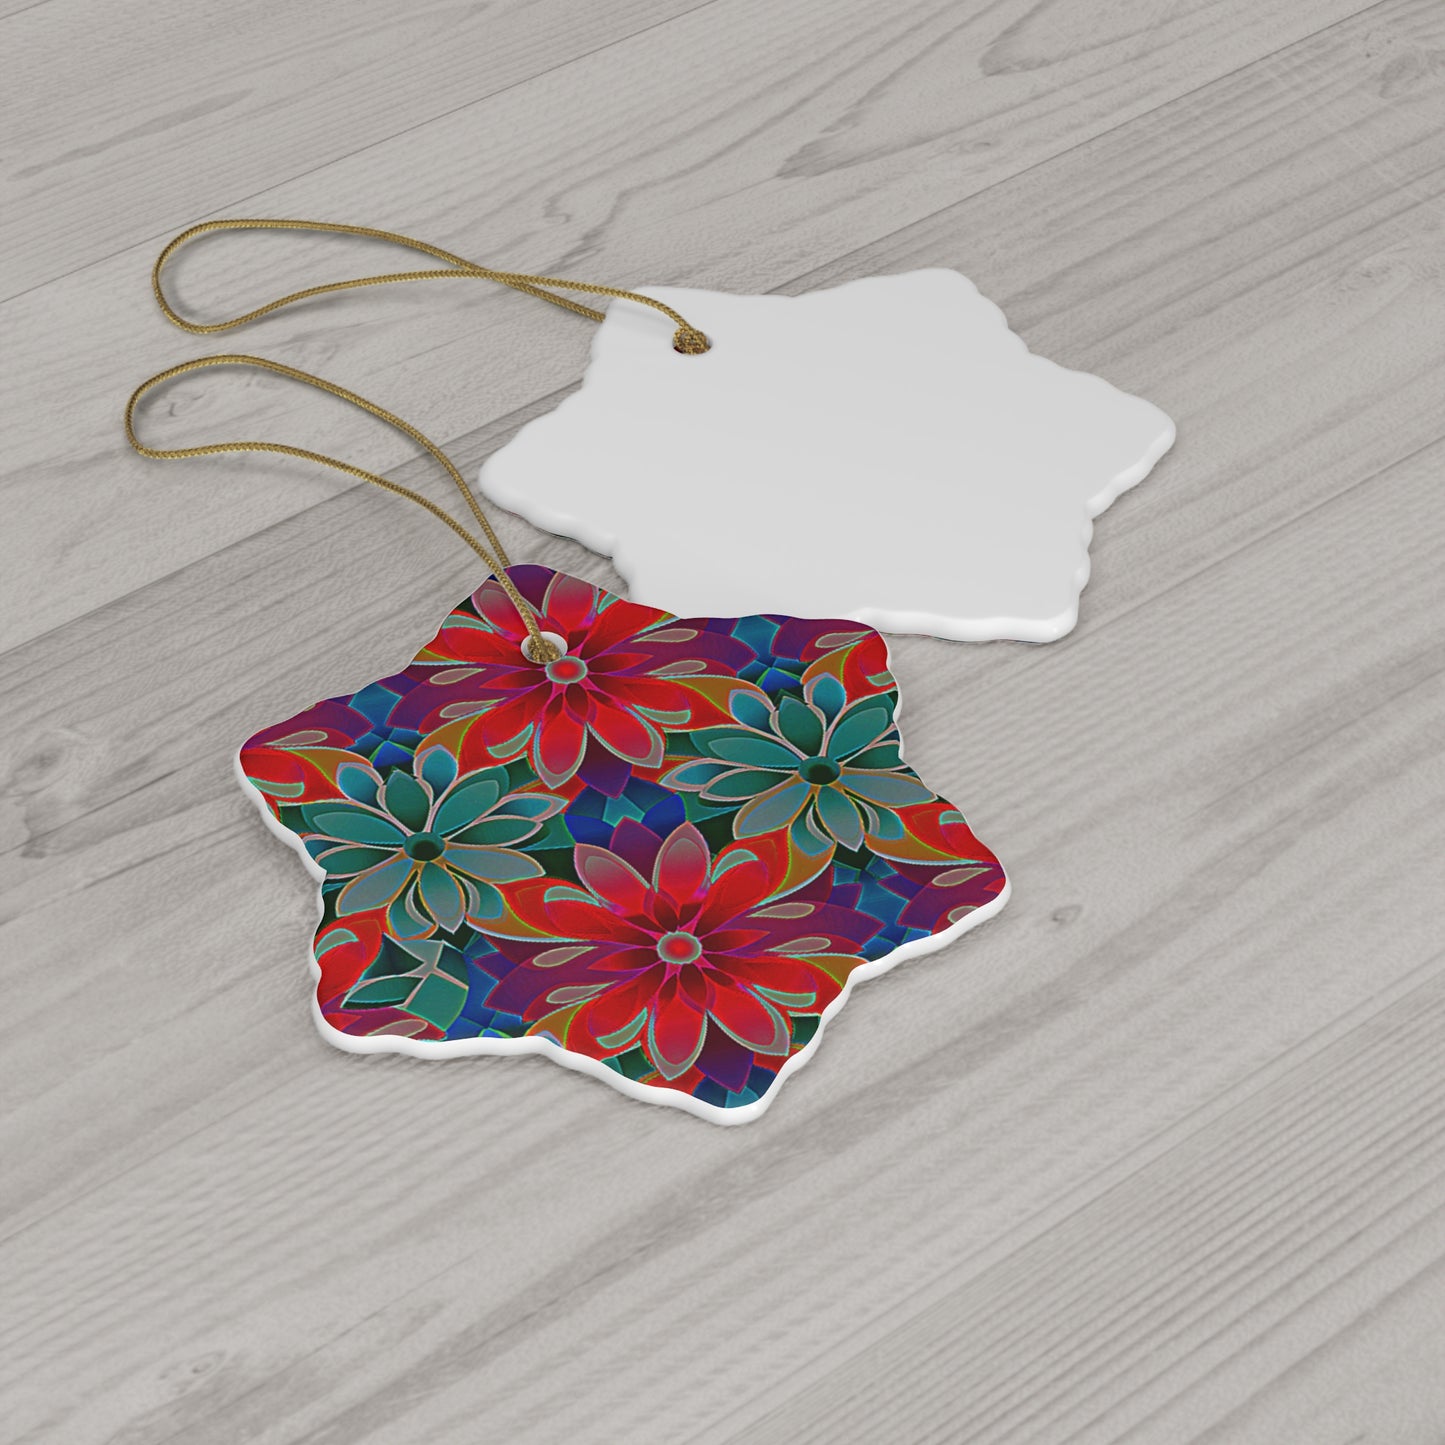 Red Green and Blue Flowers - Ceramic Ornament, 4 Shapes